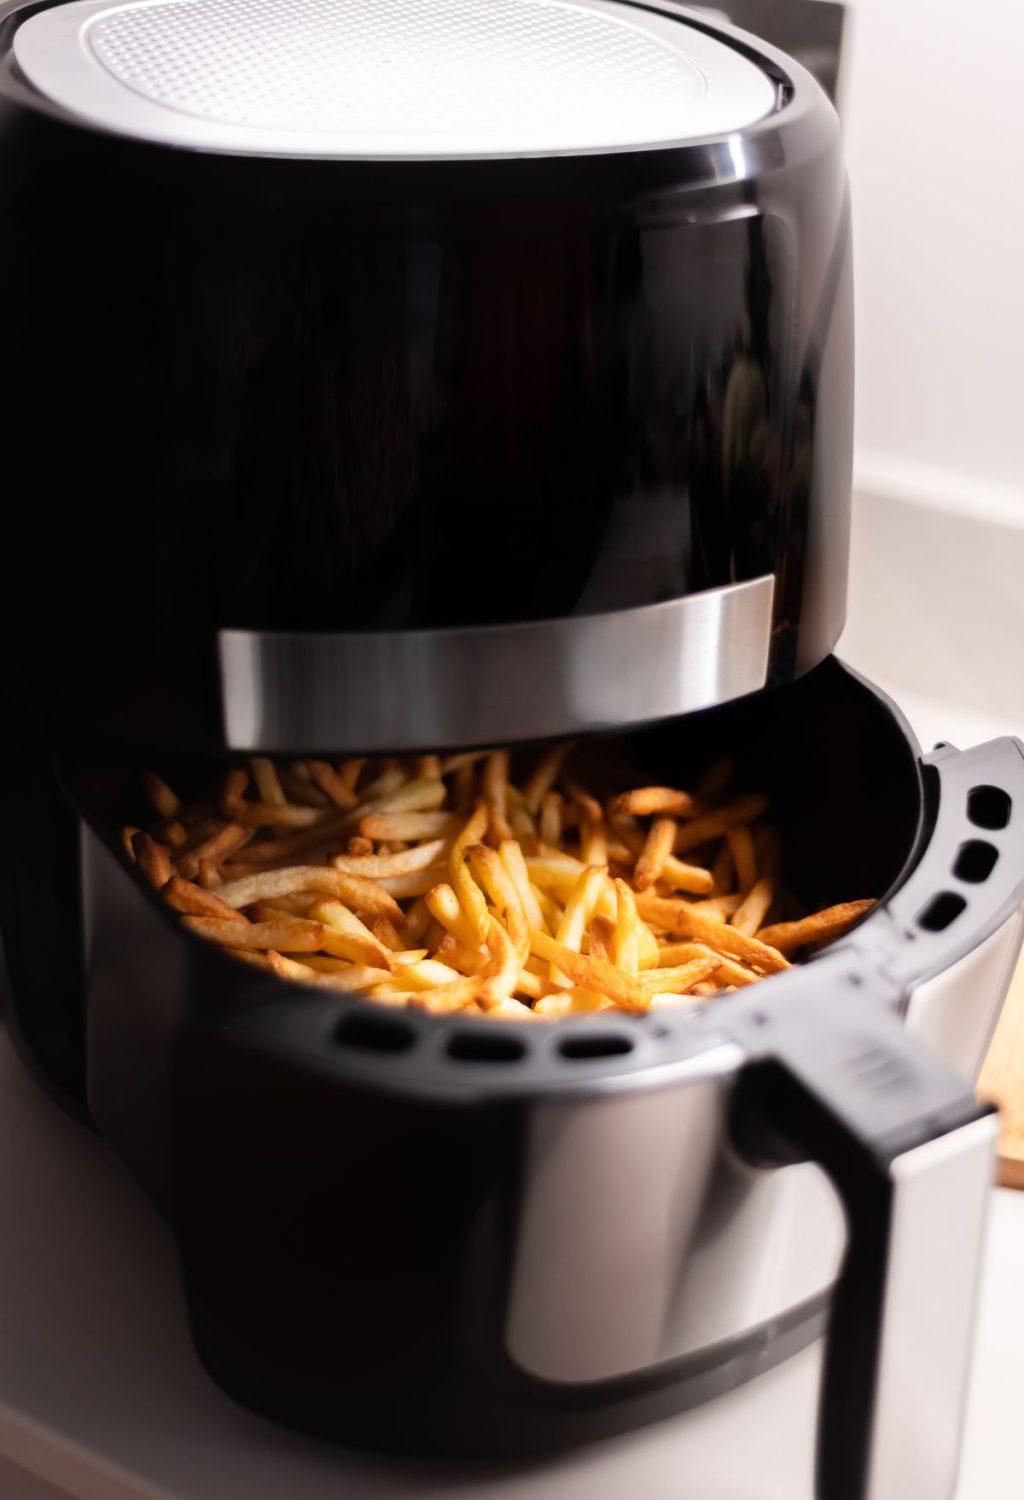 A black and silver machine with a black container full of french fries that set off the smoke alarm due to its air fryer setting.